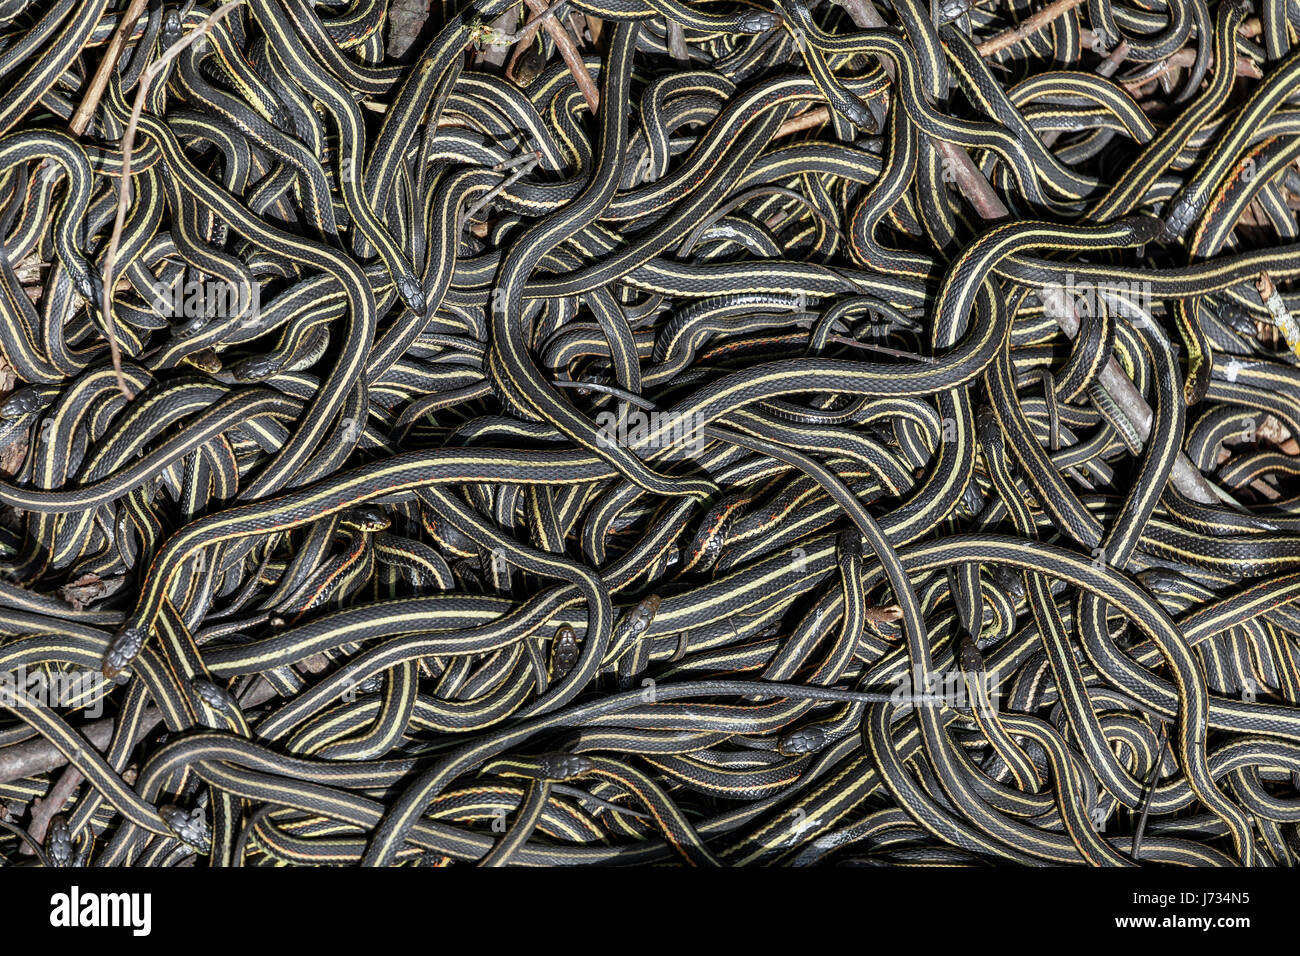 Red-sided Garter Snakes gathered in annual mating ritual in the Narcisse Snake Dens, Narcisse, Manitoba, Canada. Stock Photo